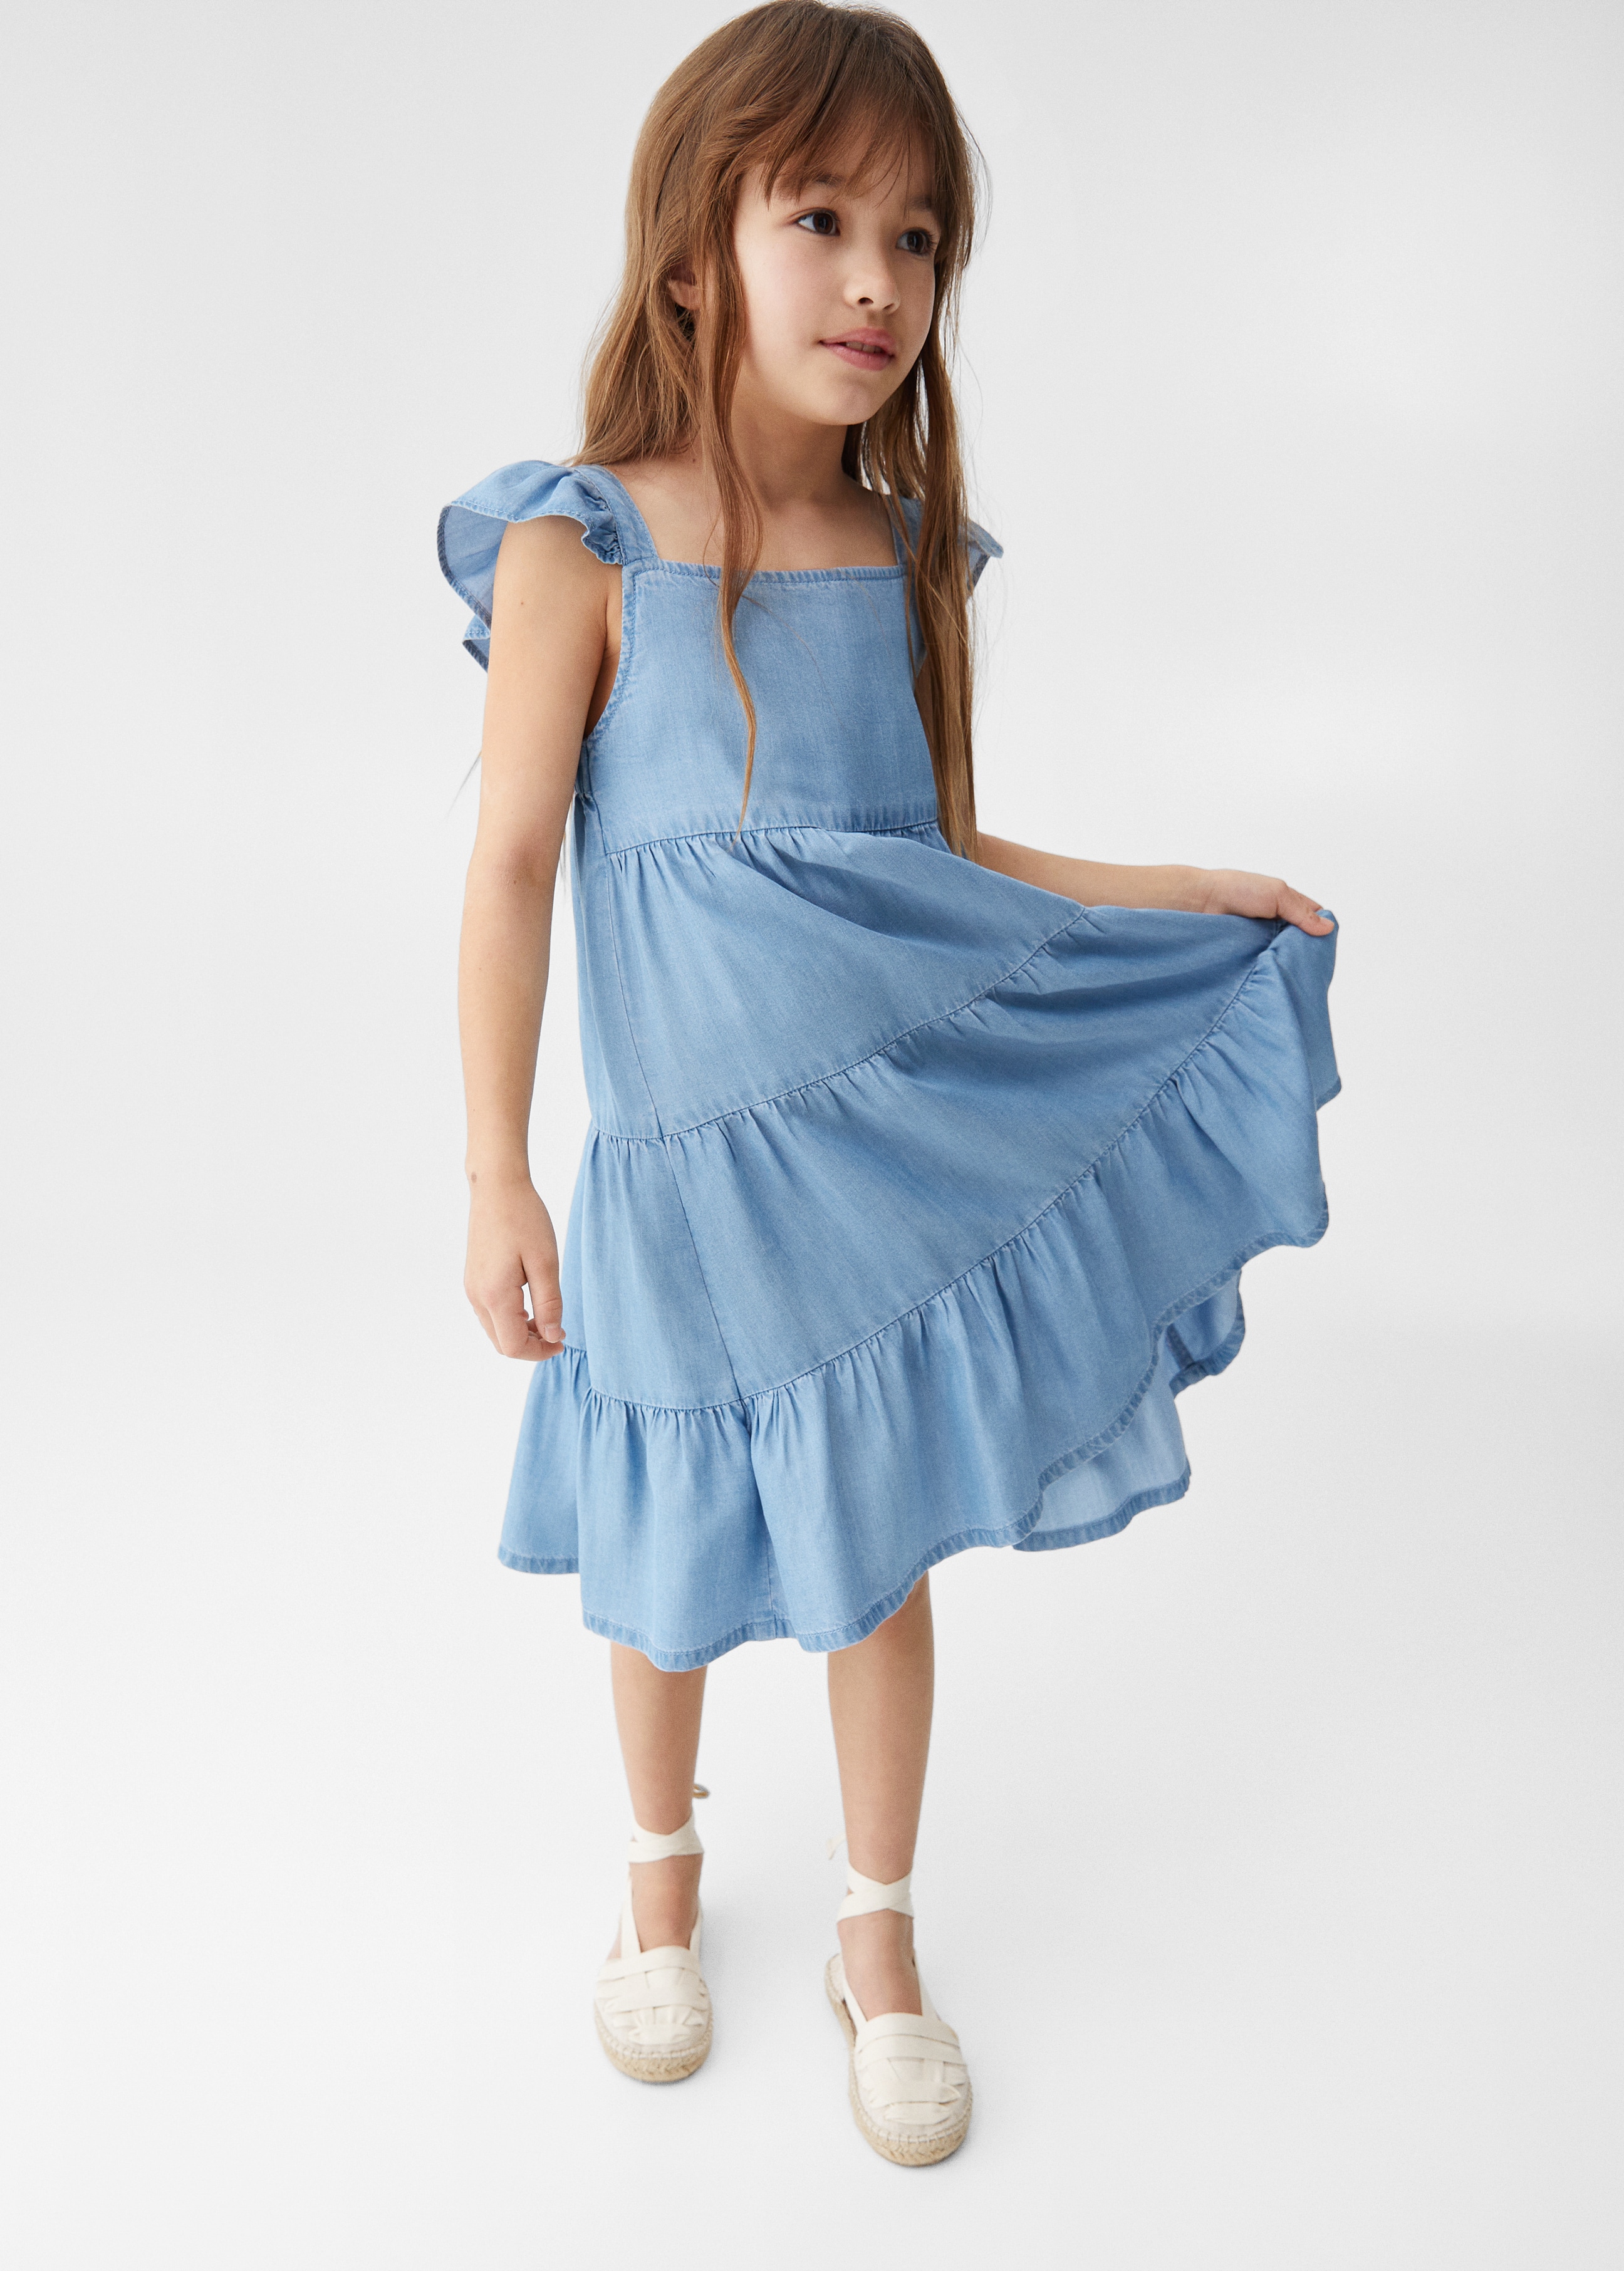 Ruffled dress - Details of the article 2